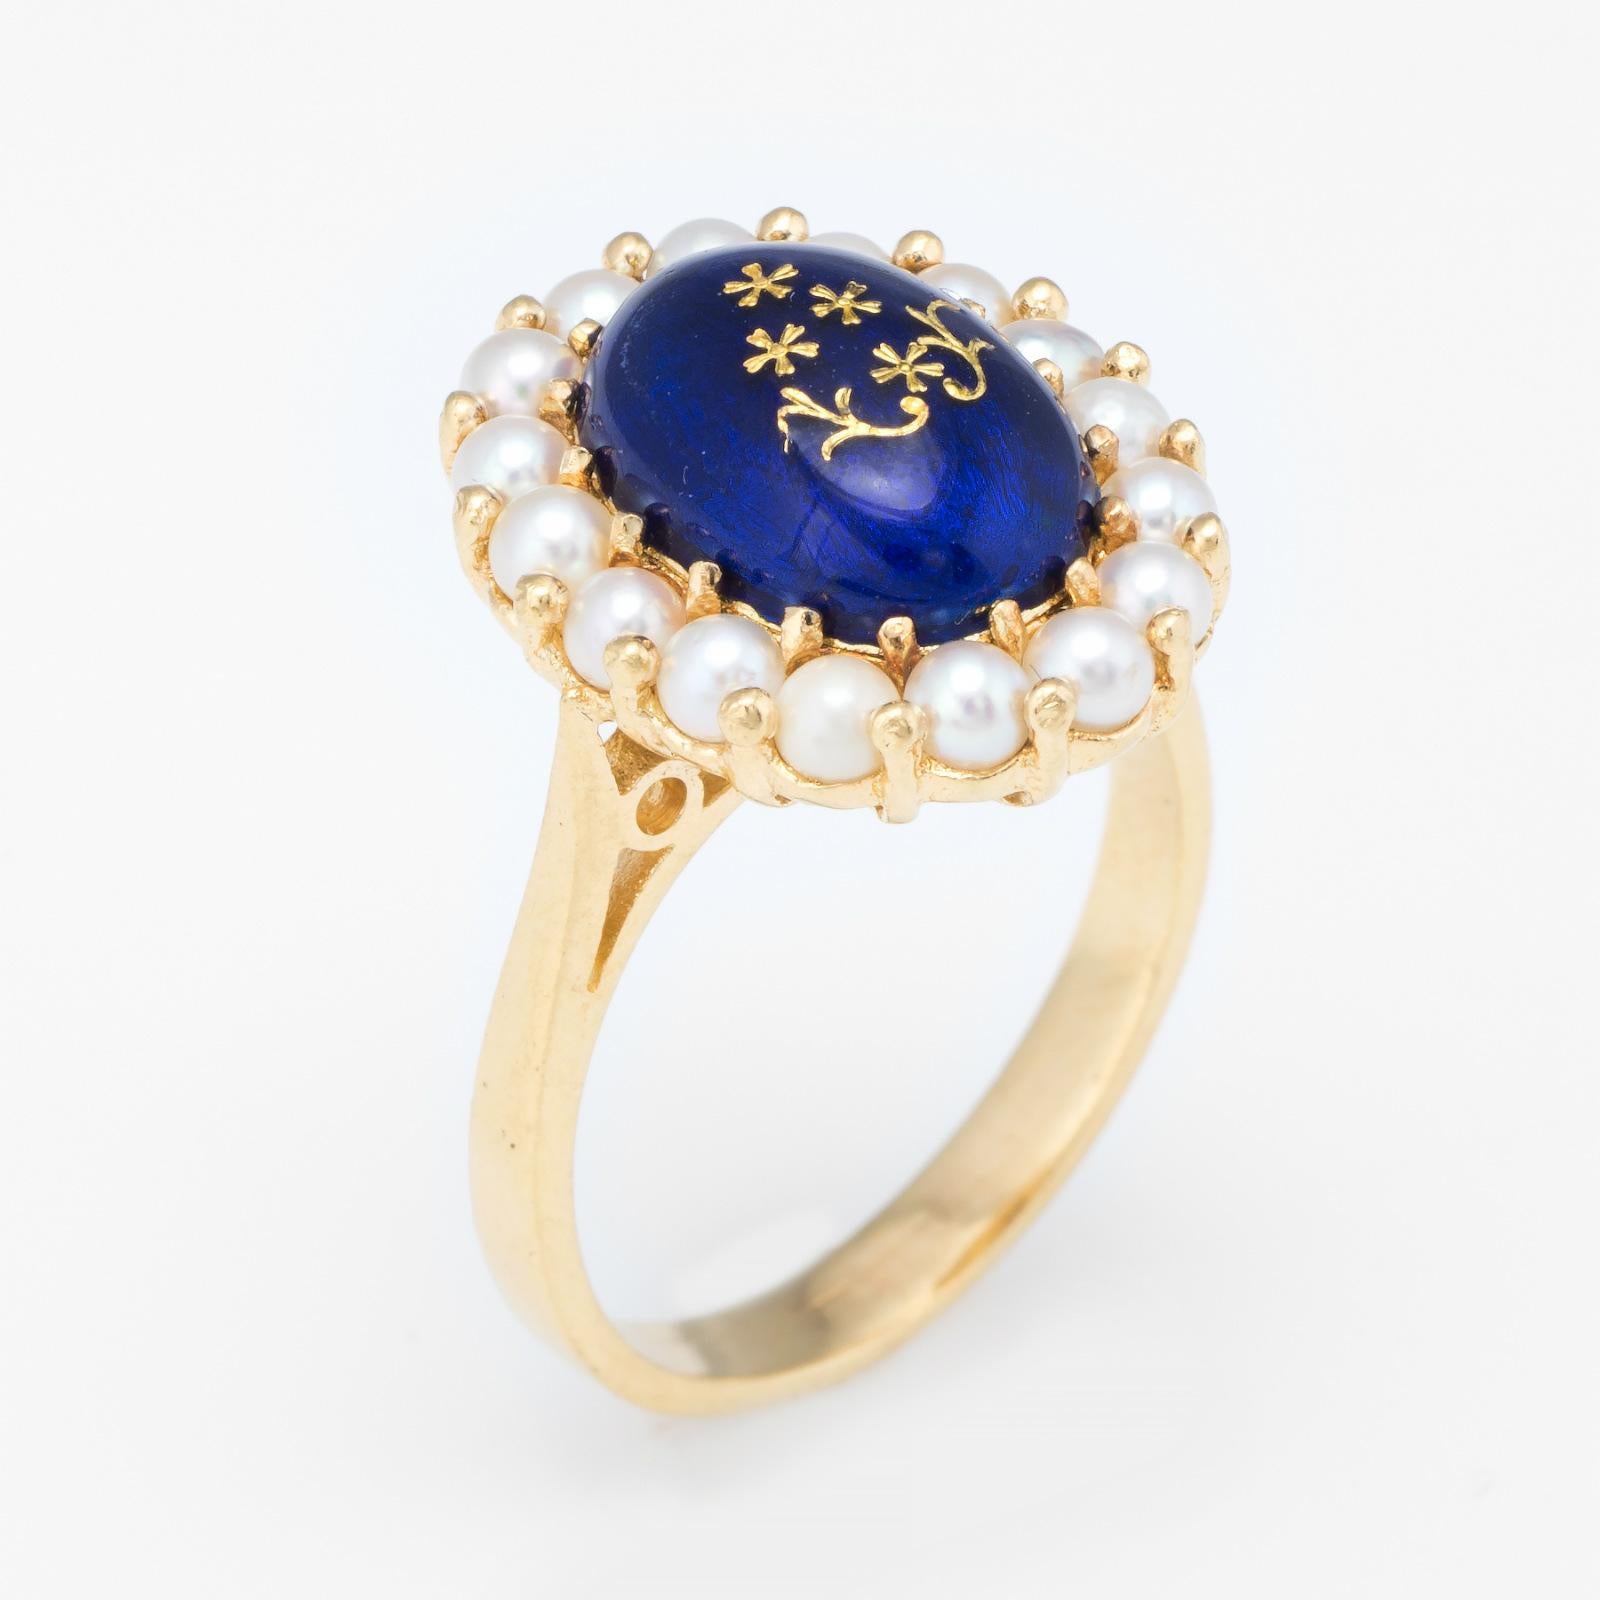 Finely detailed vintage cocktail ring, crafted in 18 karat yellow gold. 

Cultured pearls each measure 2.5mm, framing a domed blue enamel center with decorative gold floral detail. The pearls are well matching, lustrous and show rose overtones. The